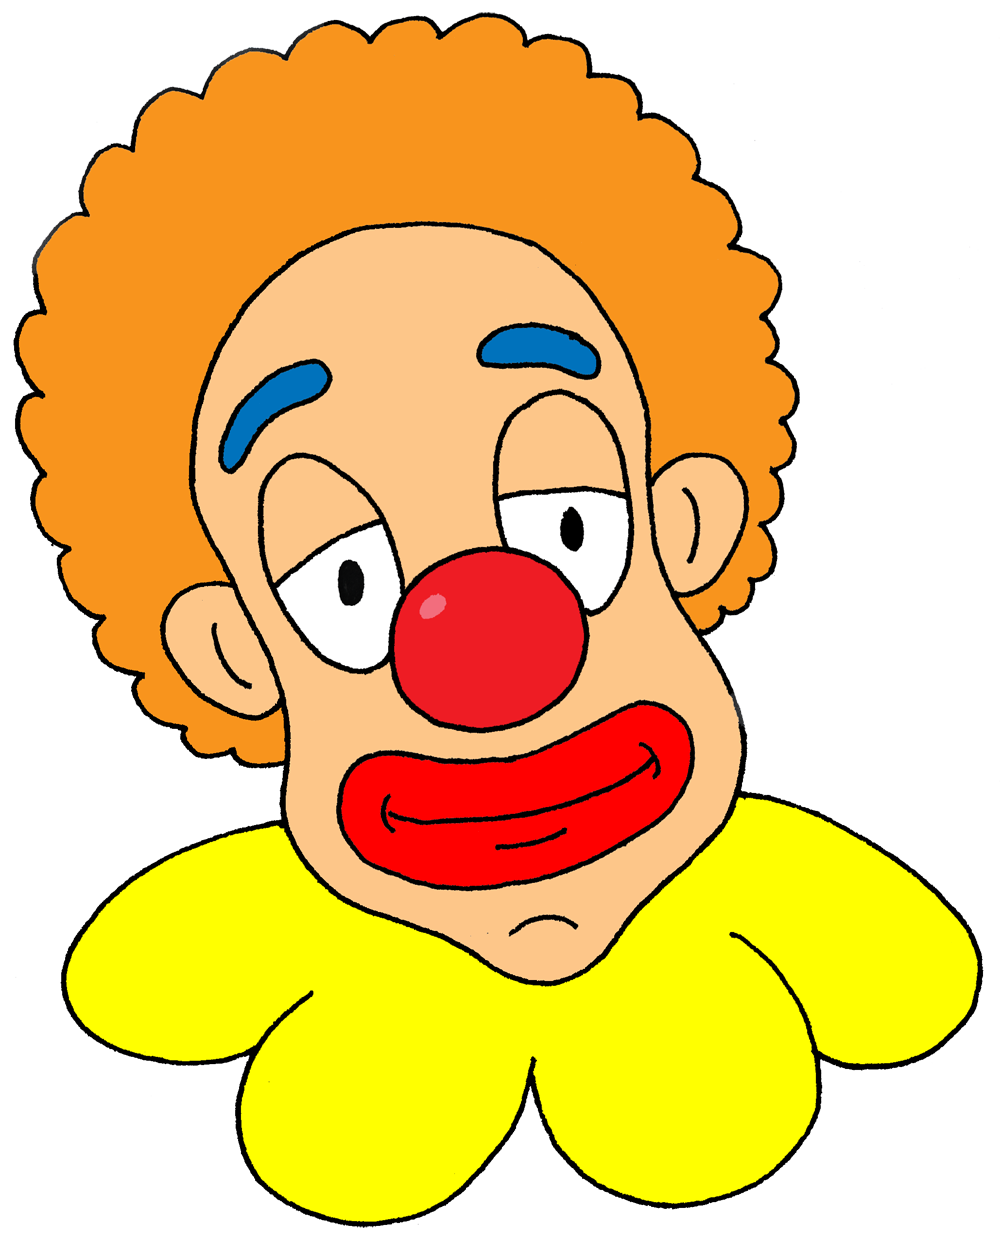 Circus Joker Face Png - Image Of Clown Face Clipart 9 Free Clown Clipart 1 Page Of 3, Transparent background PNG HD thumbnail